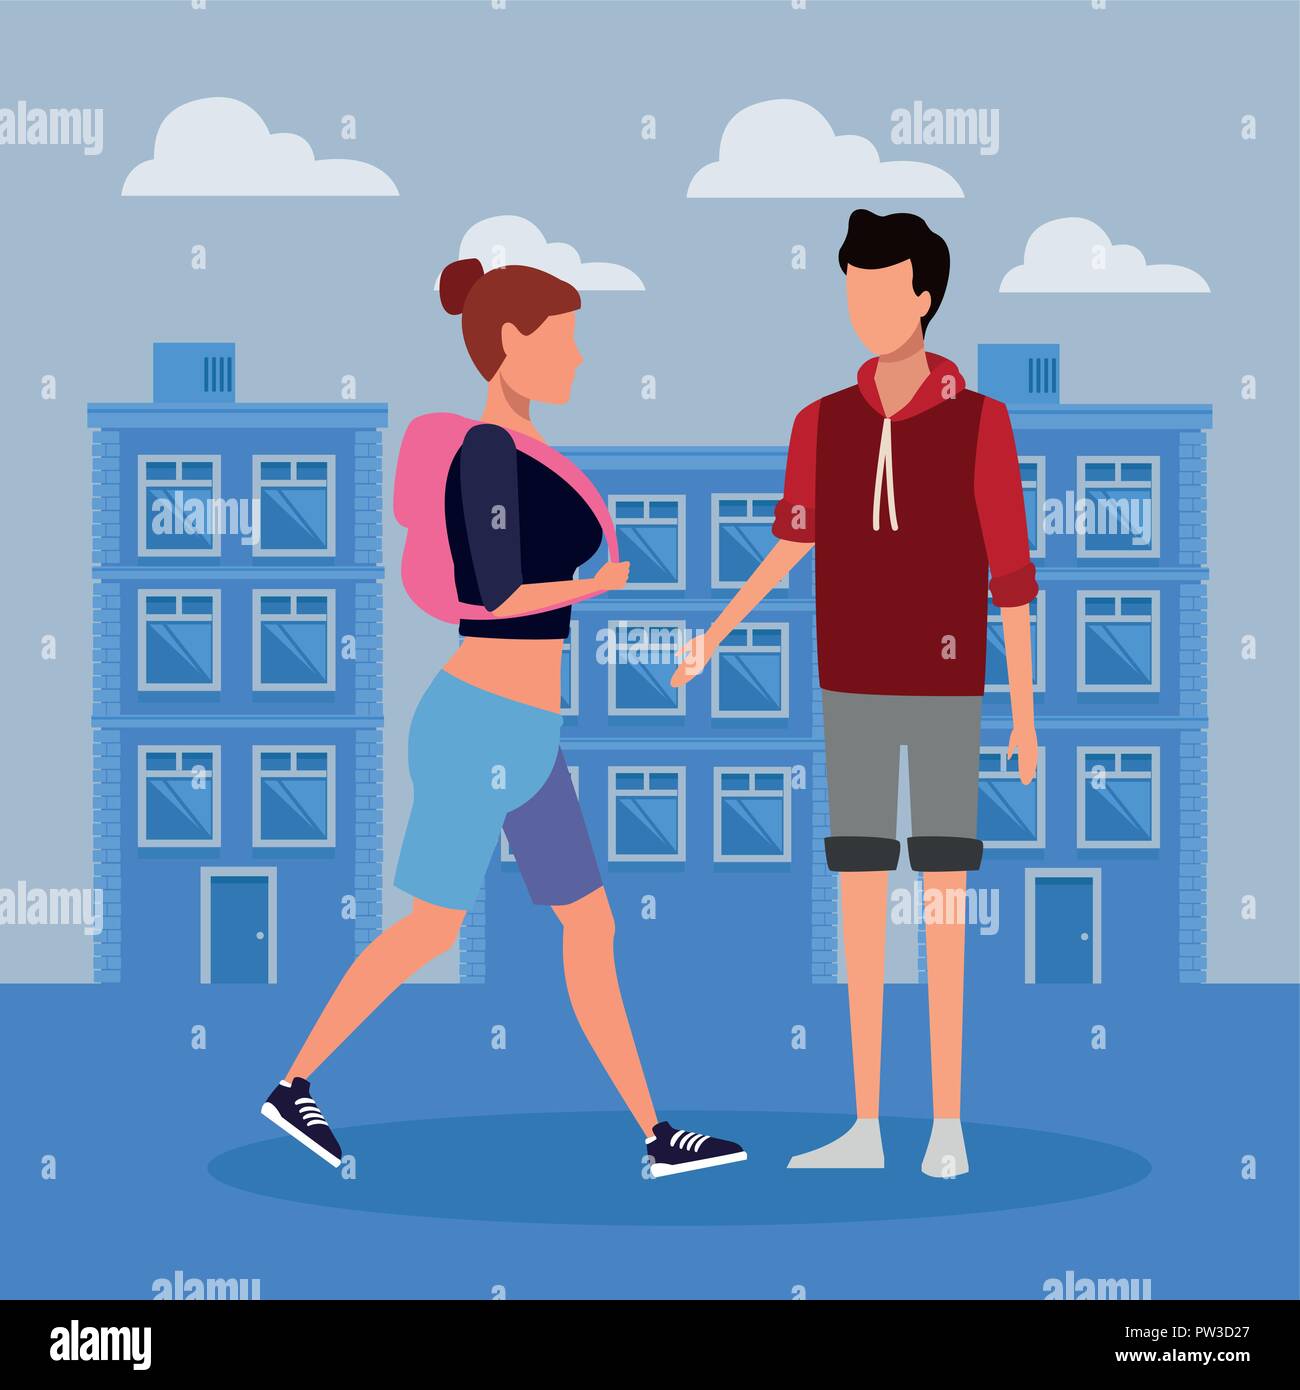 People meeting at city cartoons vector illustration graphic design Stock Vector